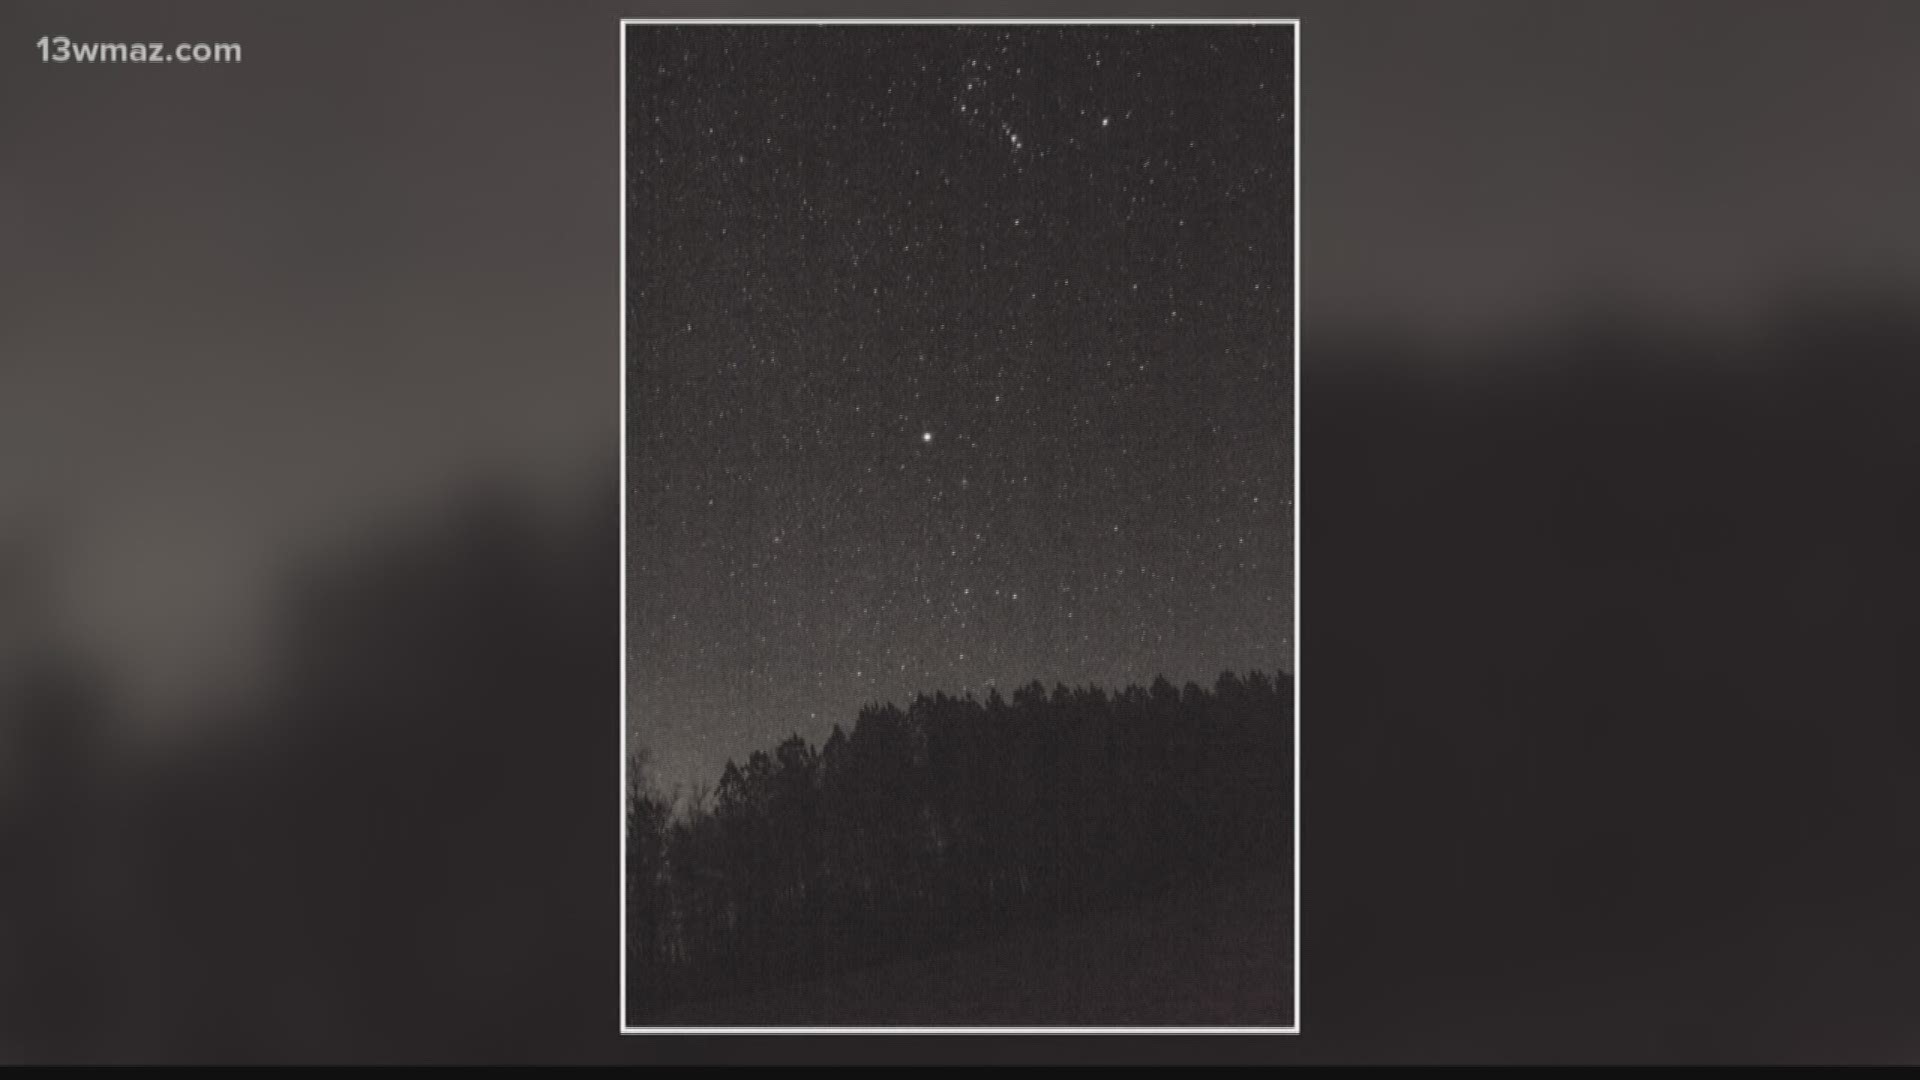 If you're into stargazing, the darkest city in the state and even the southeast has you covered. Sharon, Georgia in Taliaferro County is the place to be.